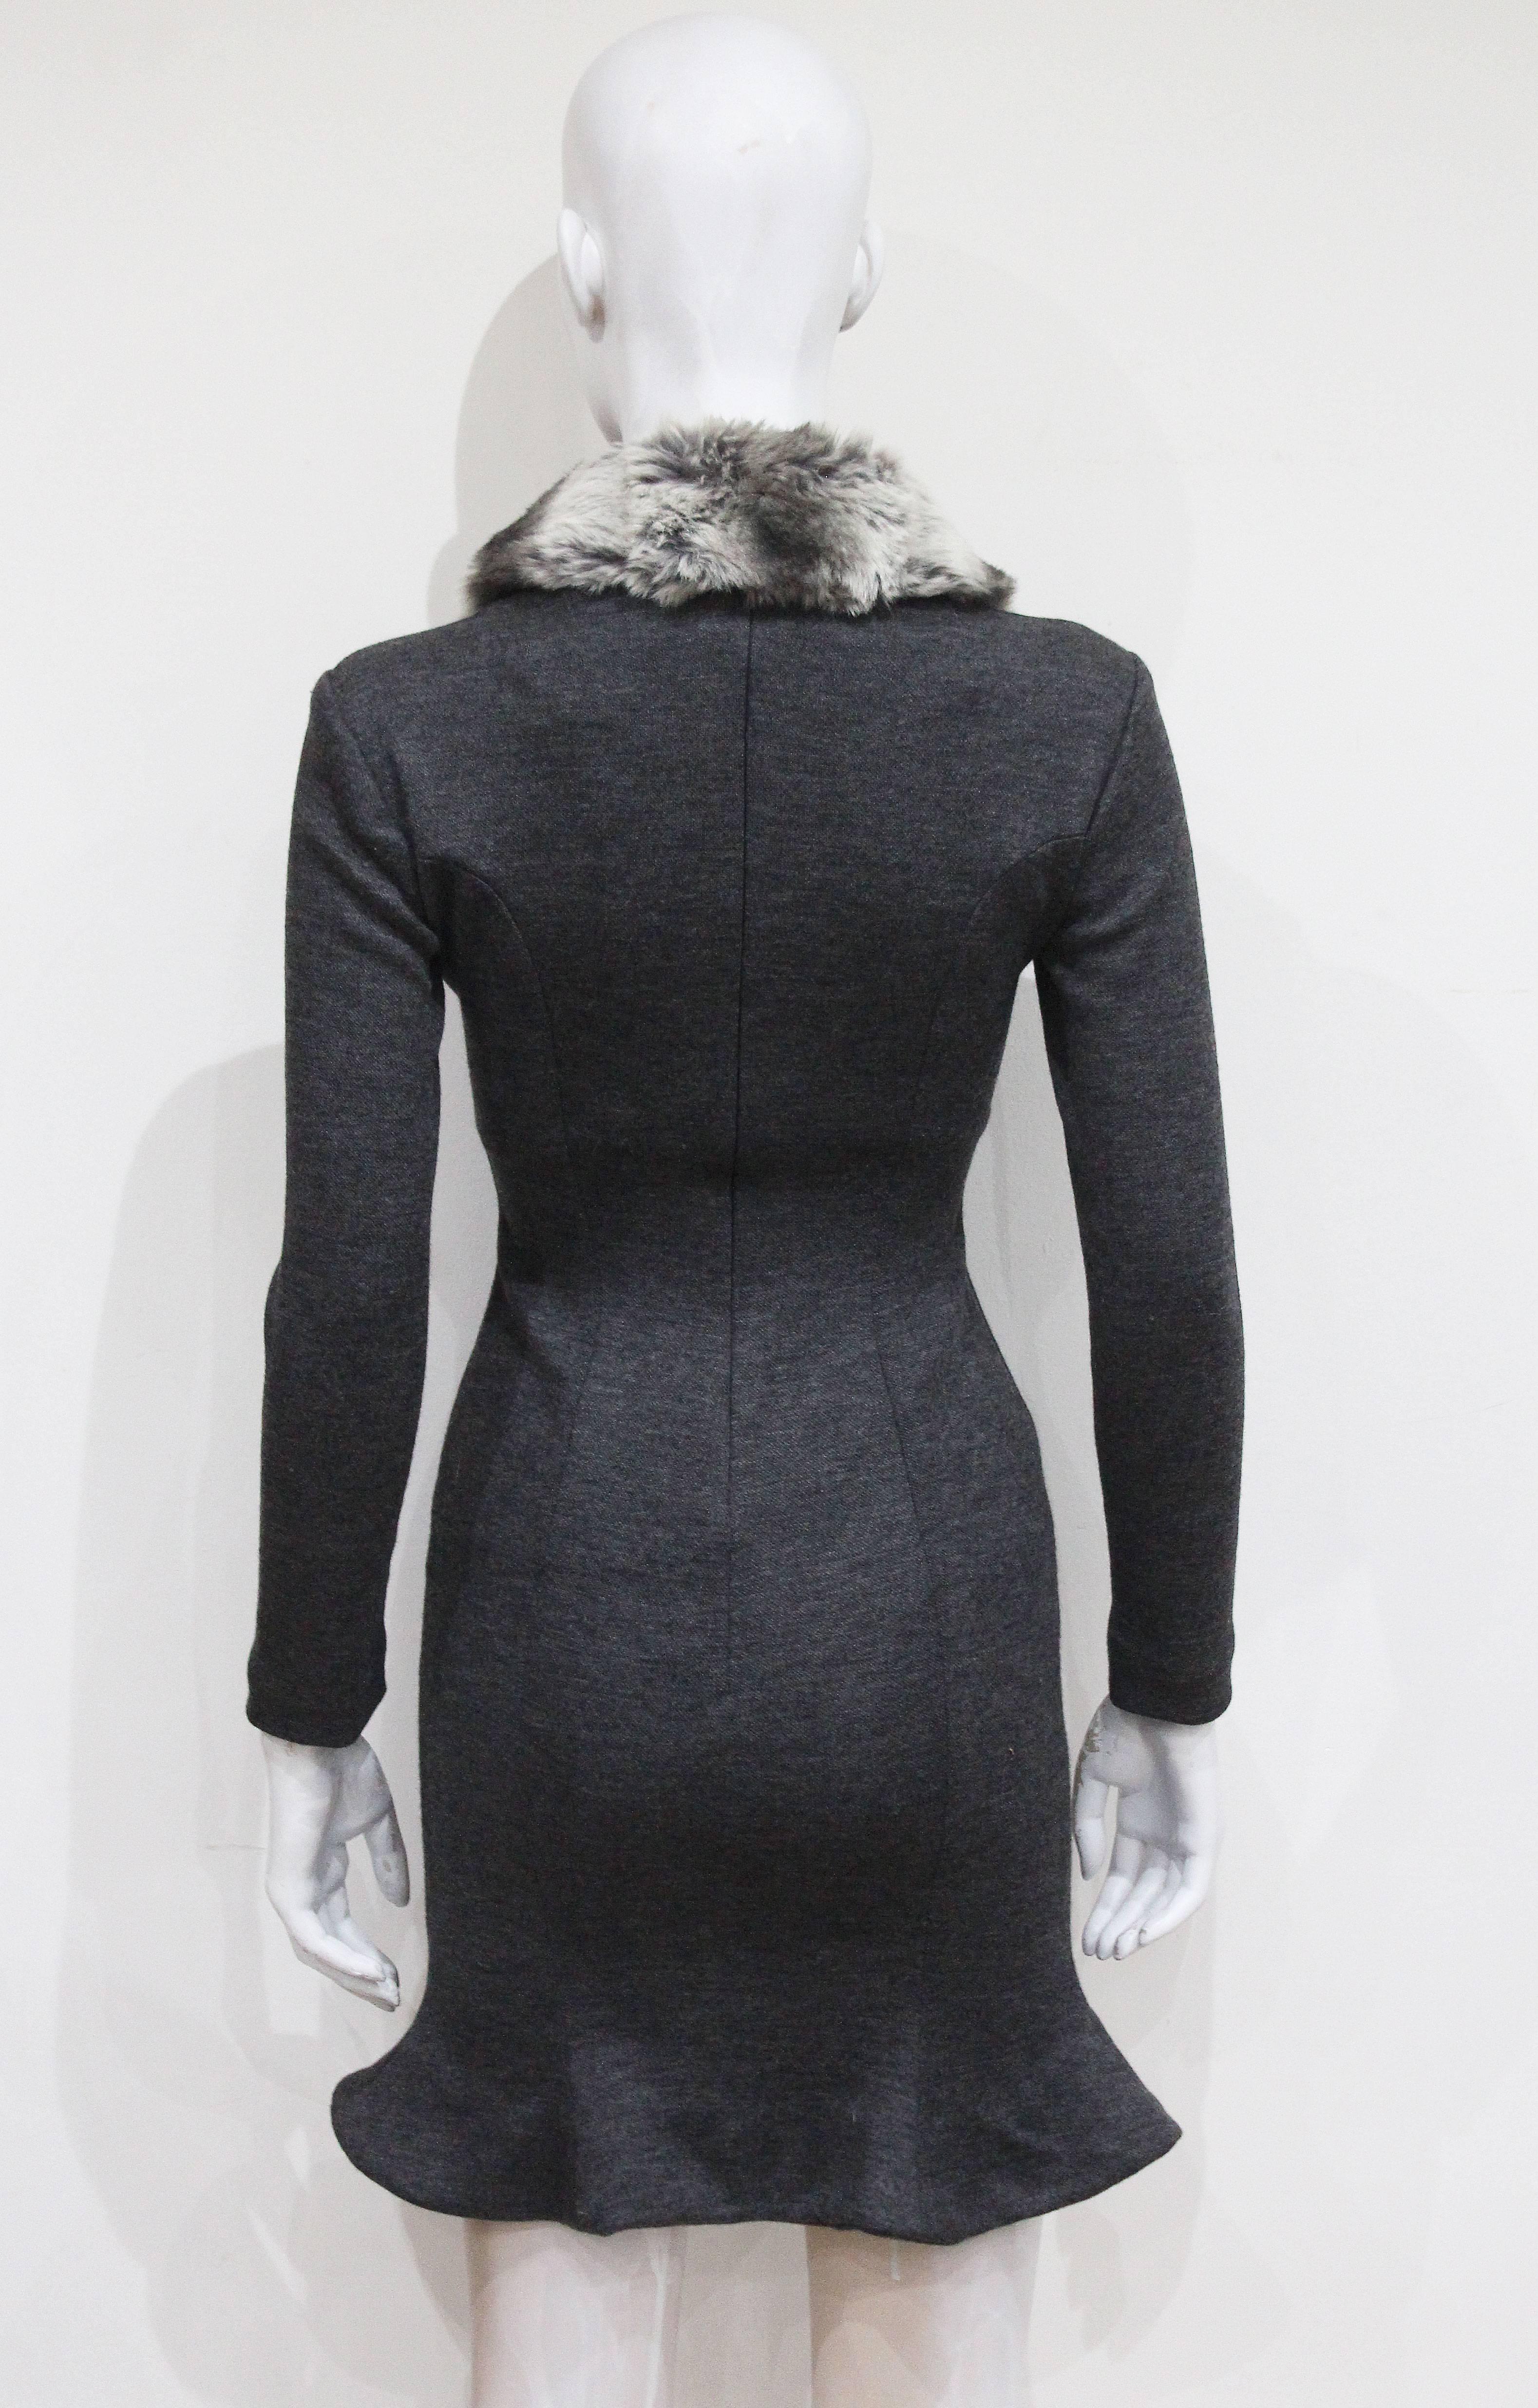 Vivienne Westwood Corseted Woollen Dress With Faux Fur Collar, c 1990s 1